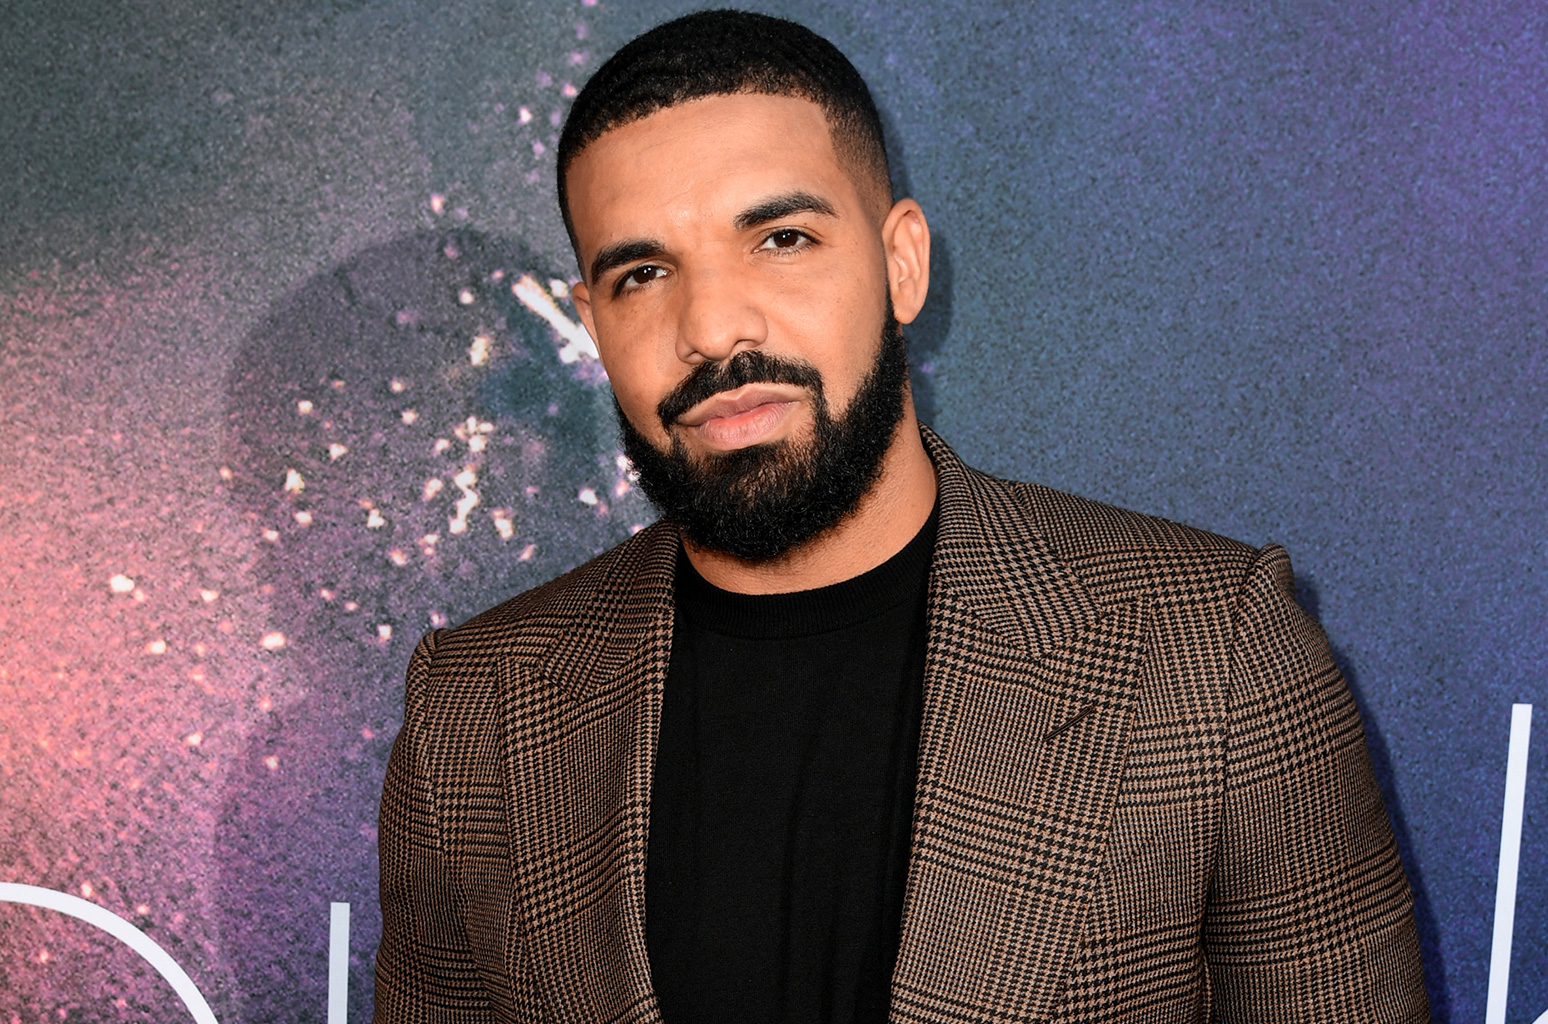 Drake Had the Most Delightful Reaction to Tying the 'Glee' Cast For the Most Hot 100 Entries Ever